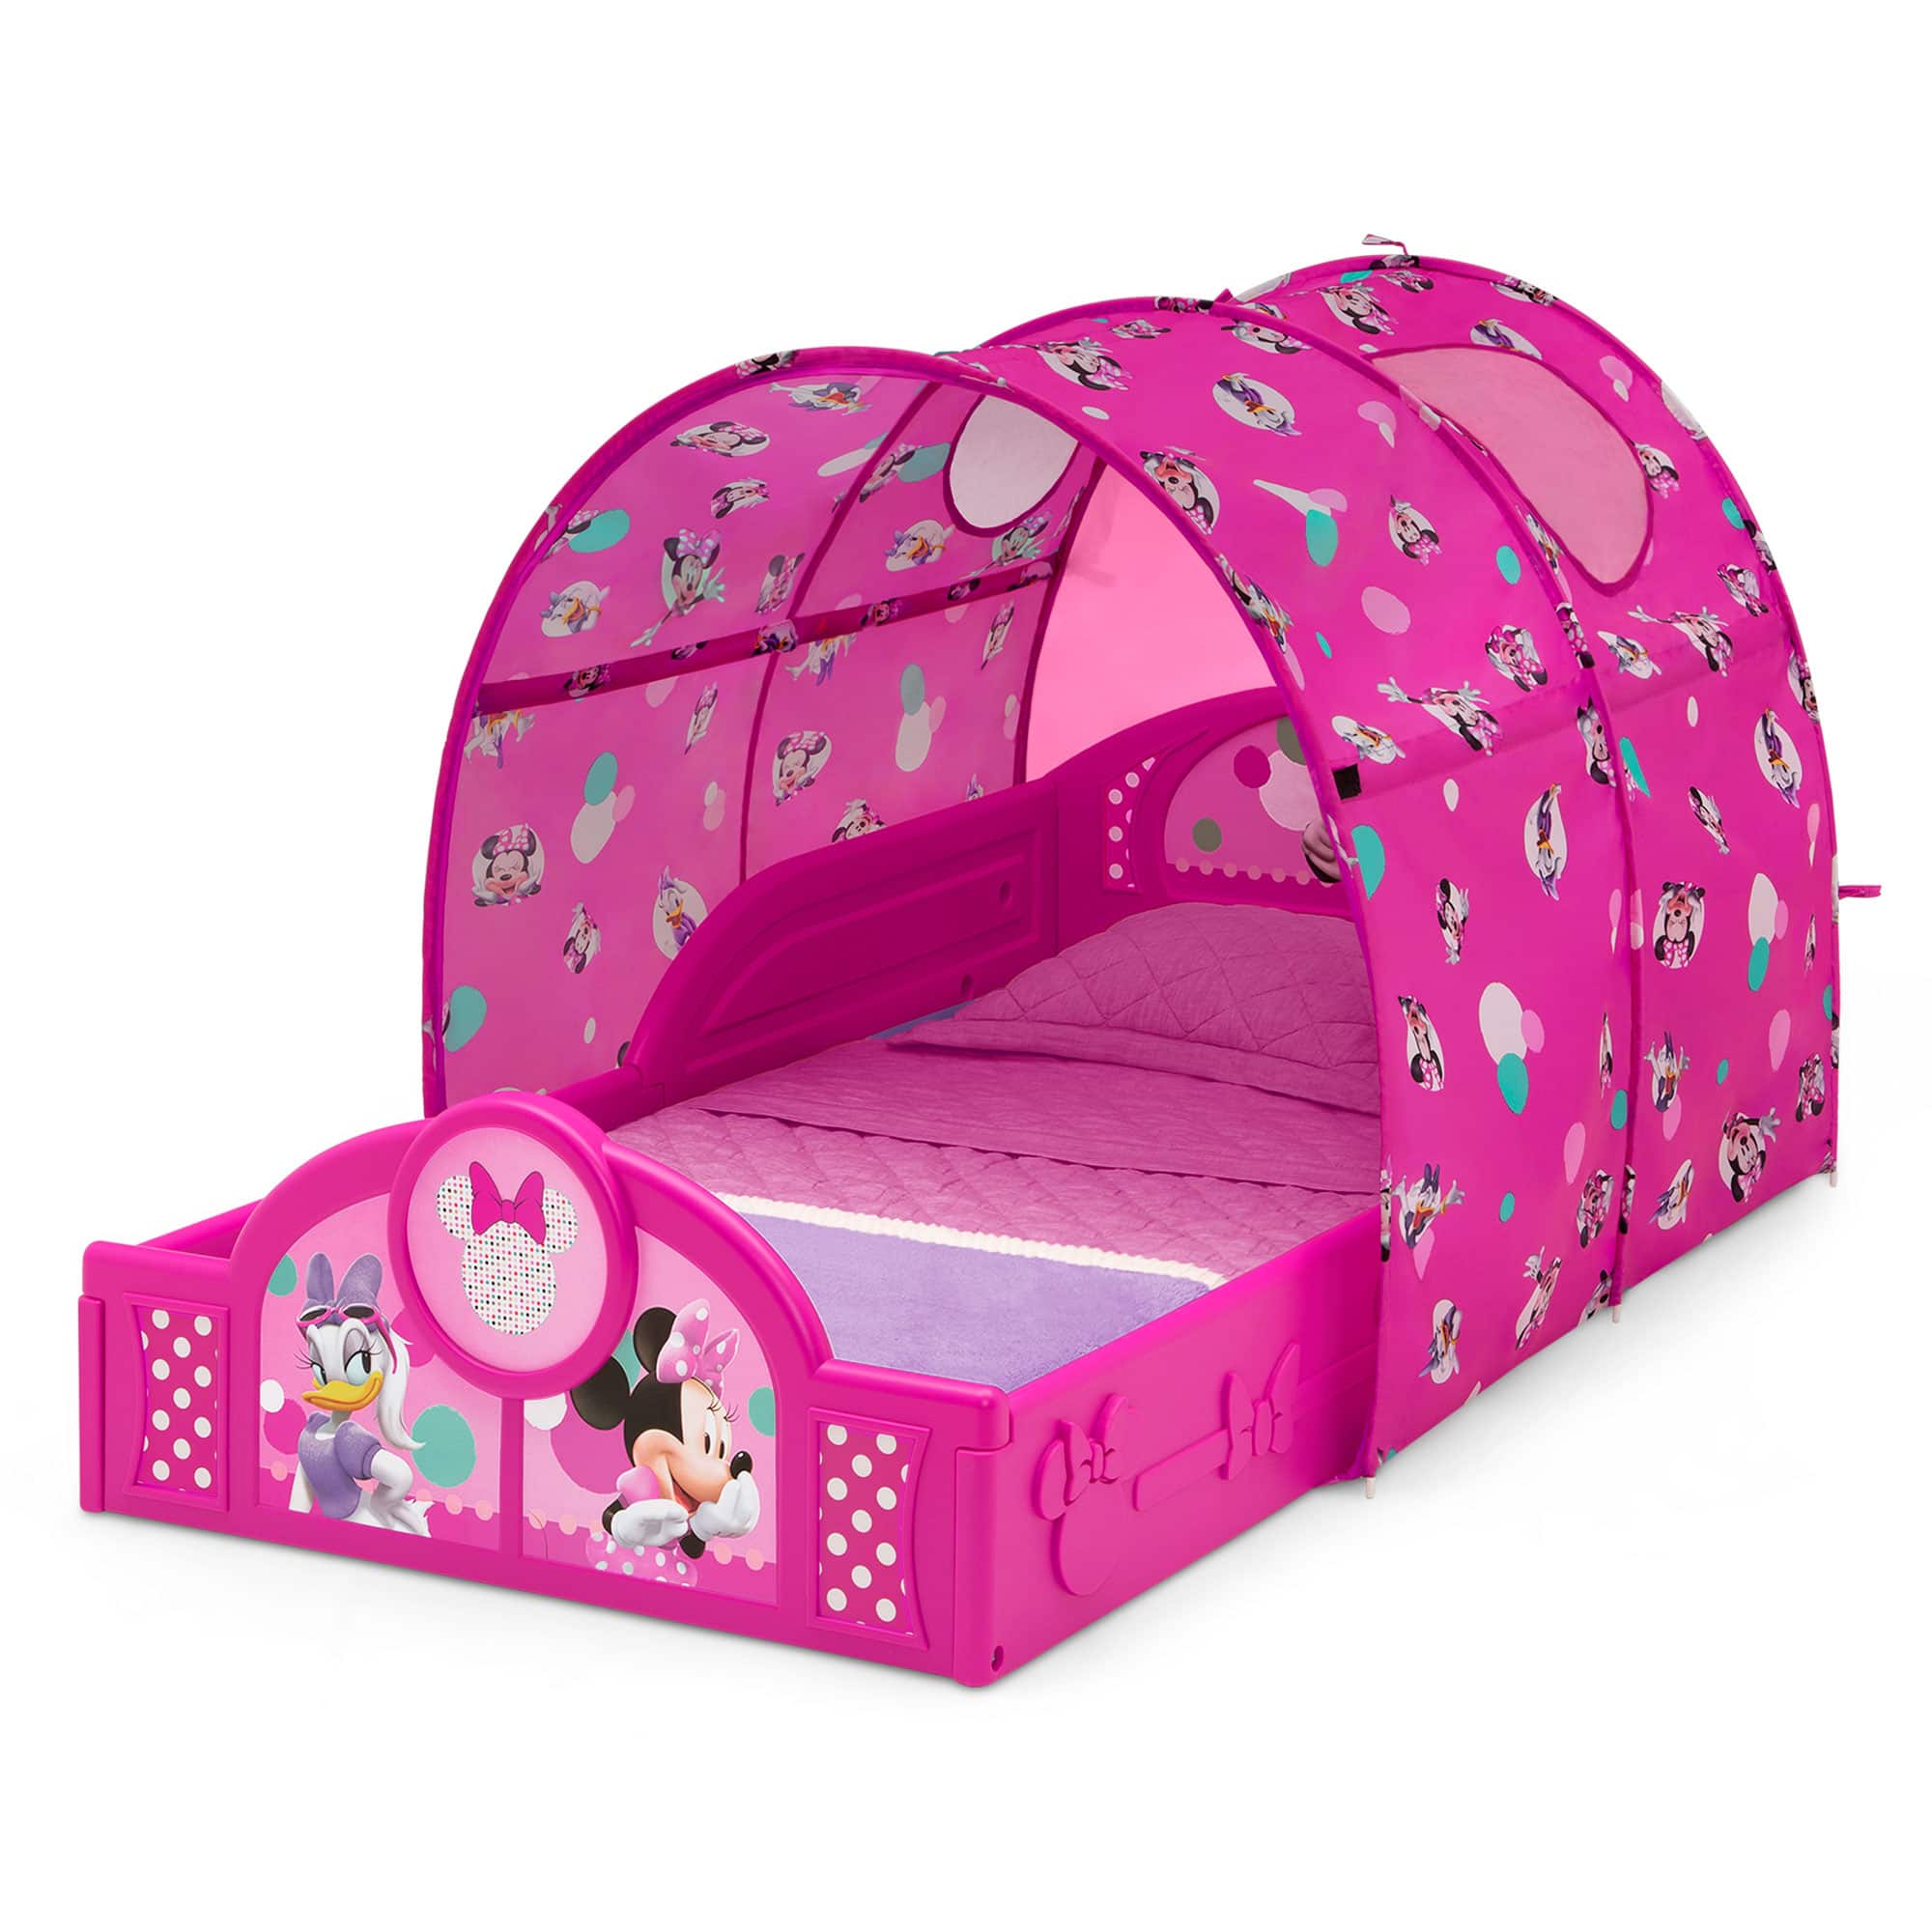 Minnie Mouse Interactive Wood Toddler Bed - Delta Children